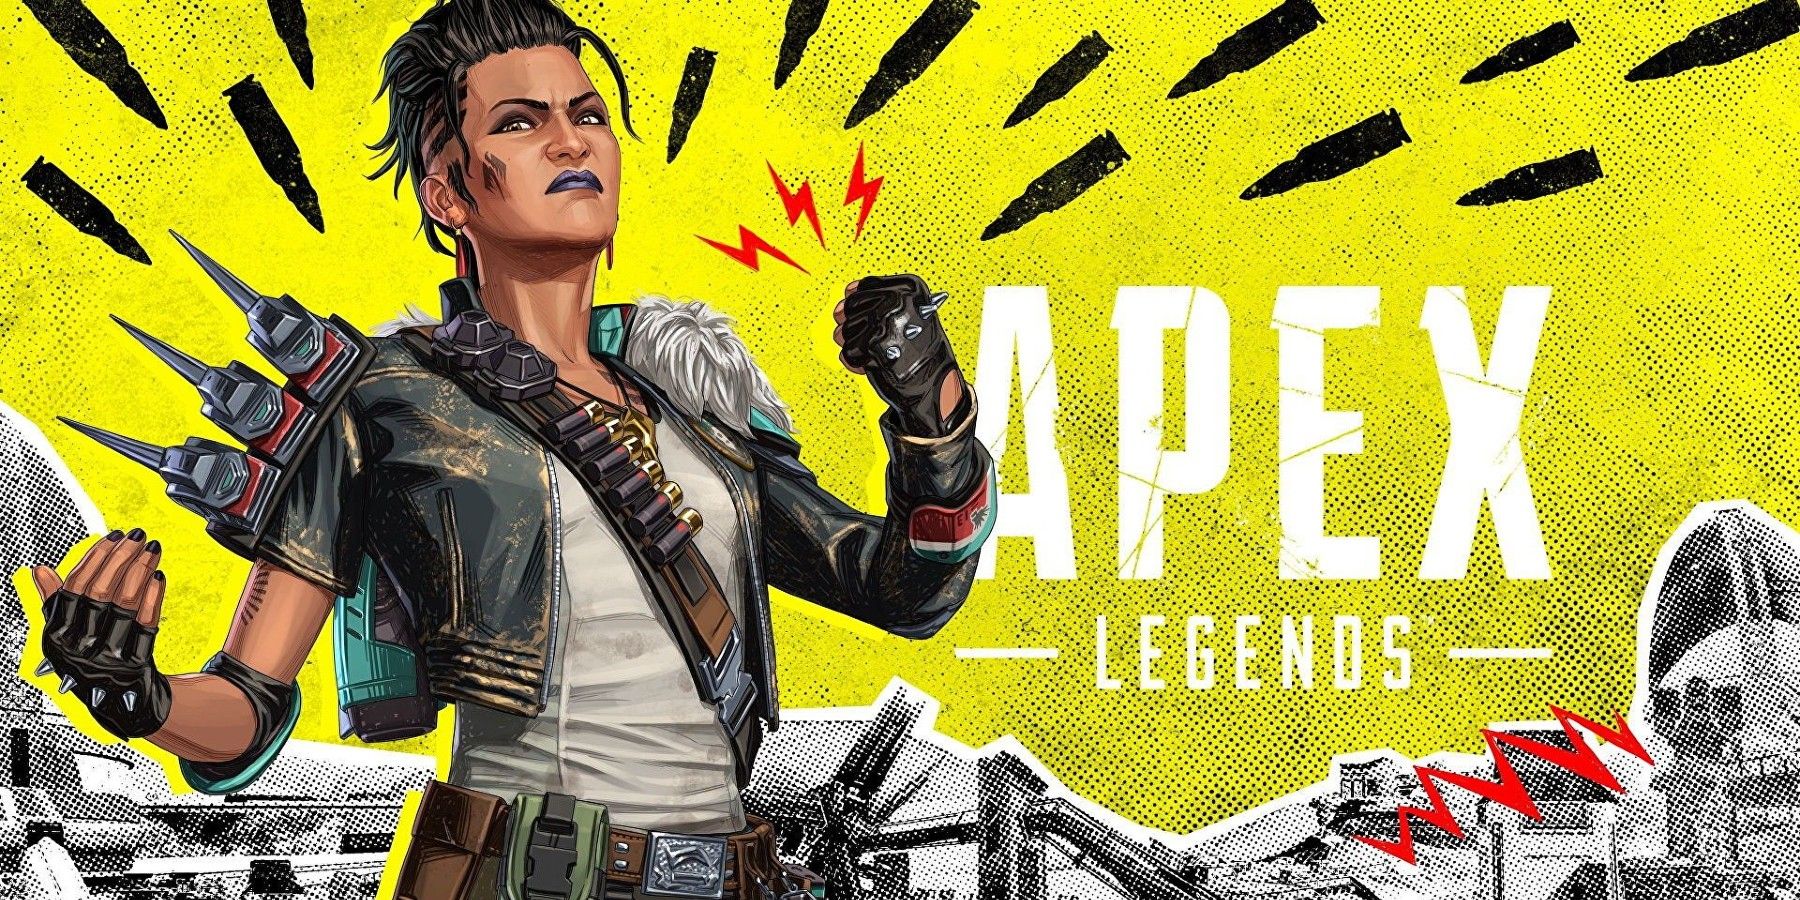 Apex Legends Reveals What's Coming in the Defiance Battle Pass